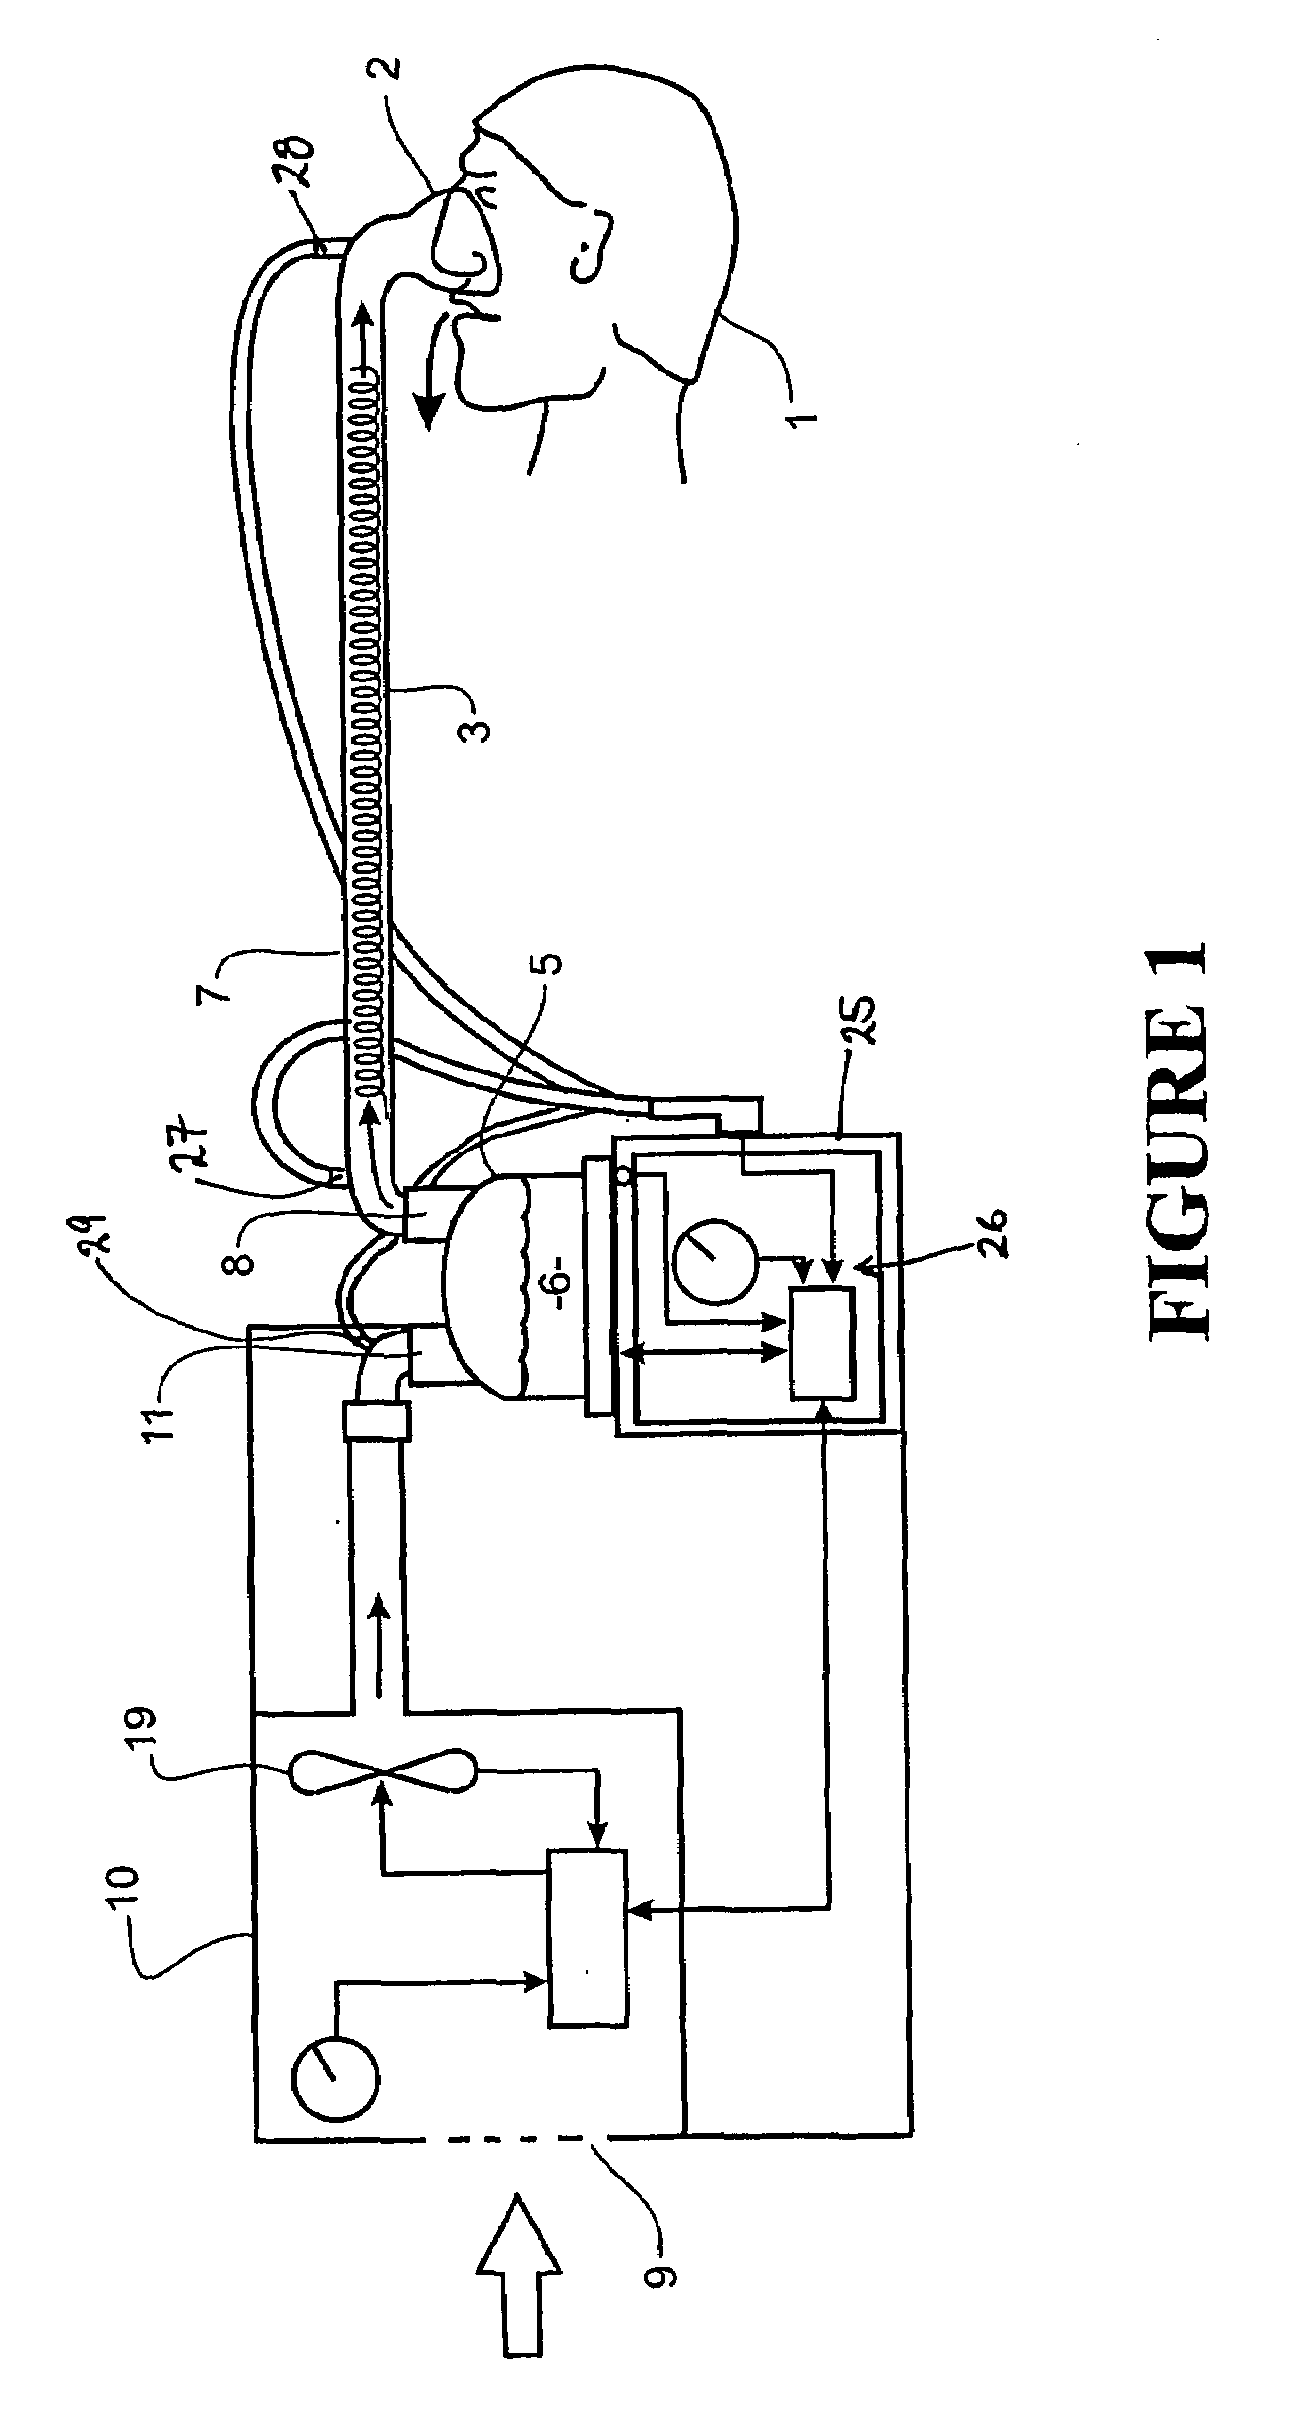 Humidifier with internal heating element and heater plate